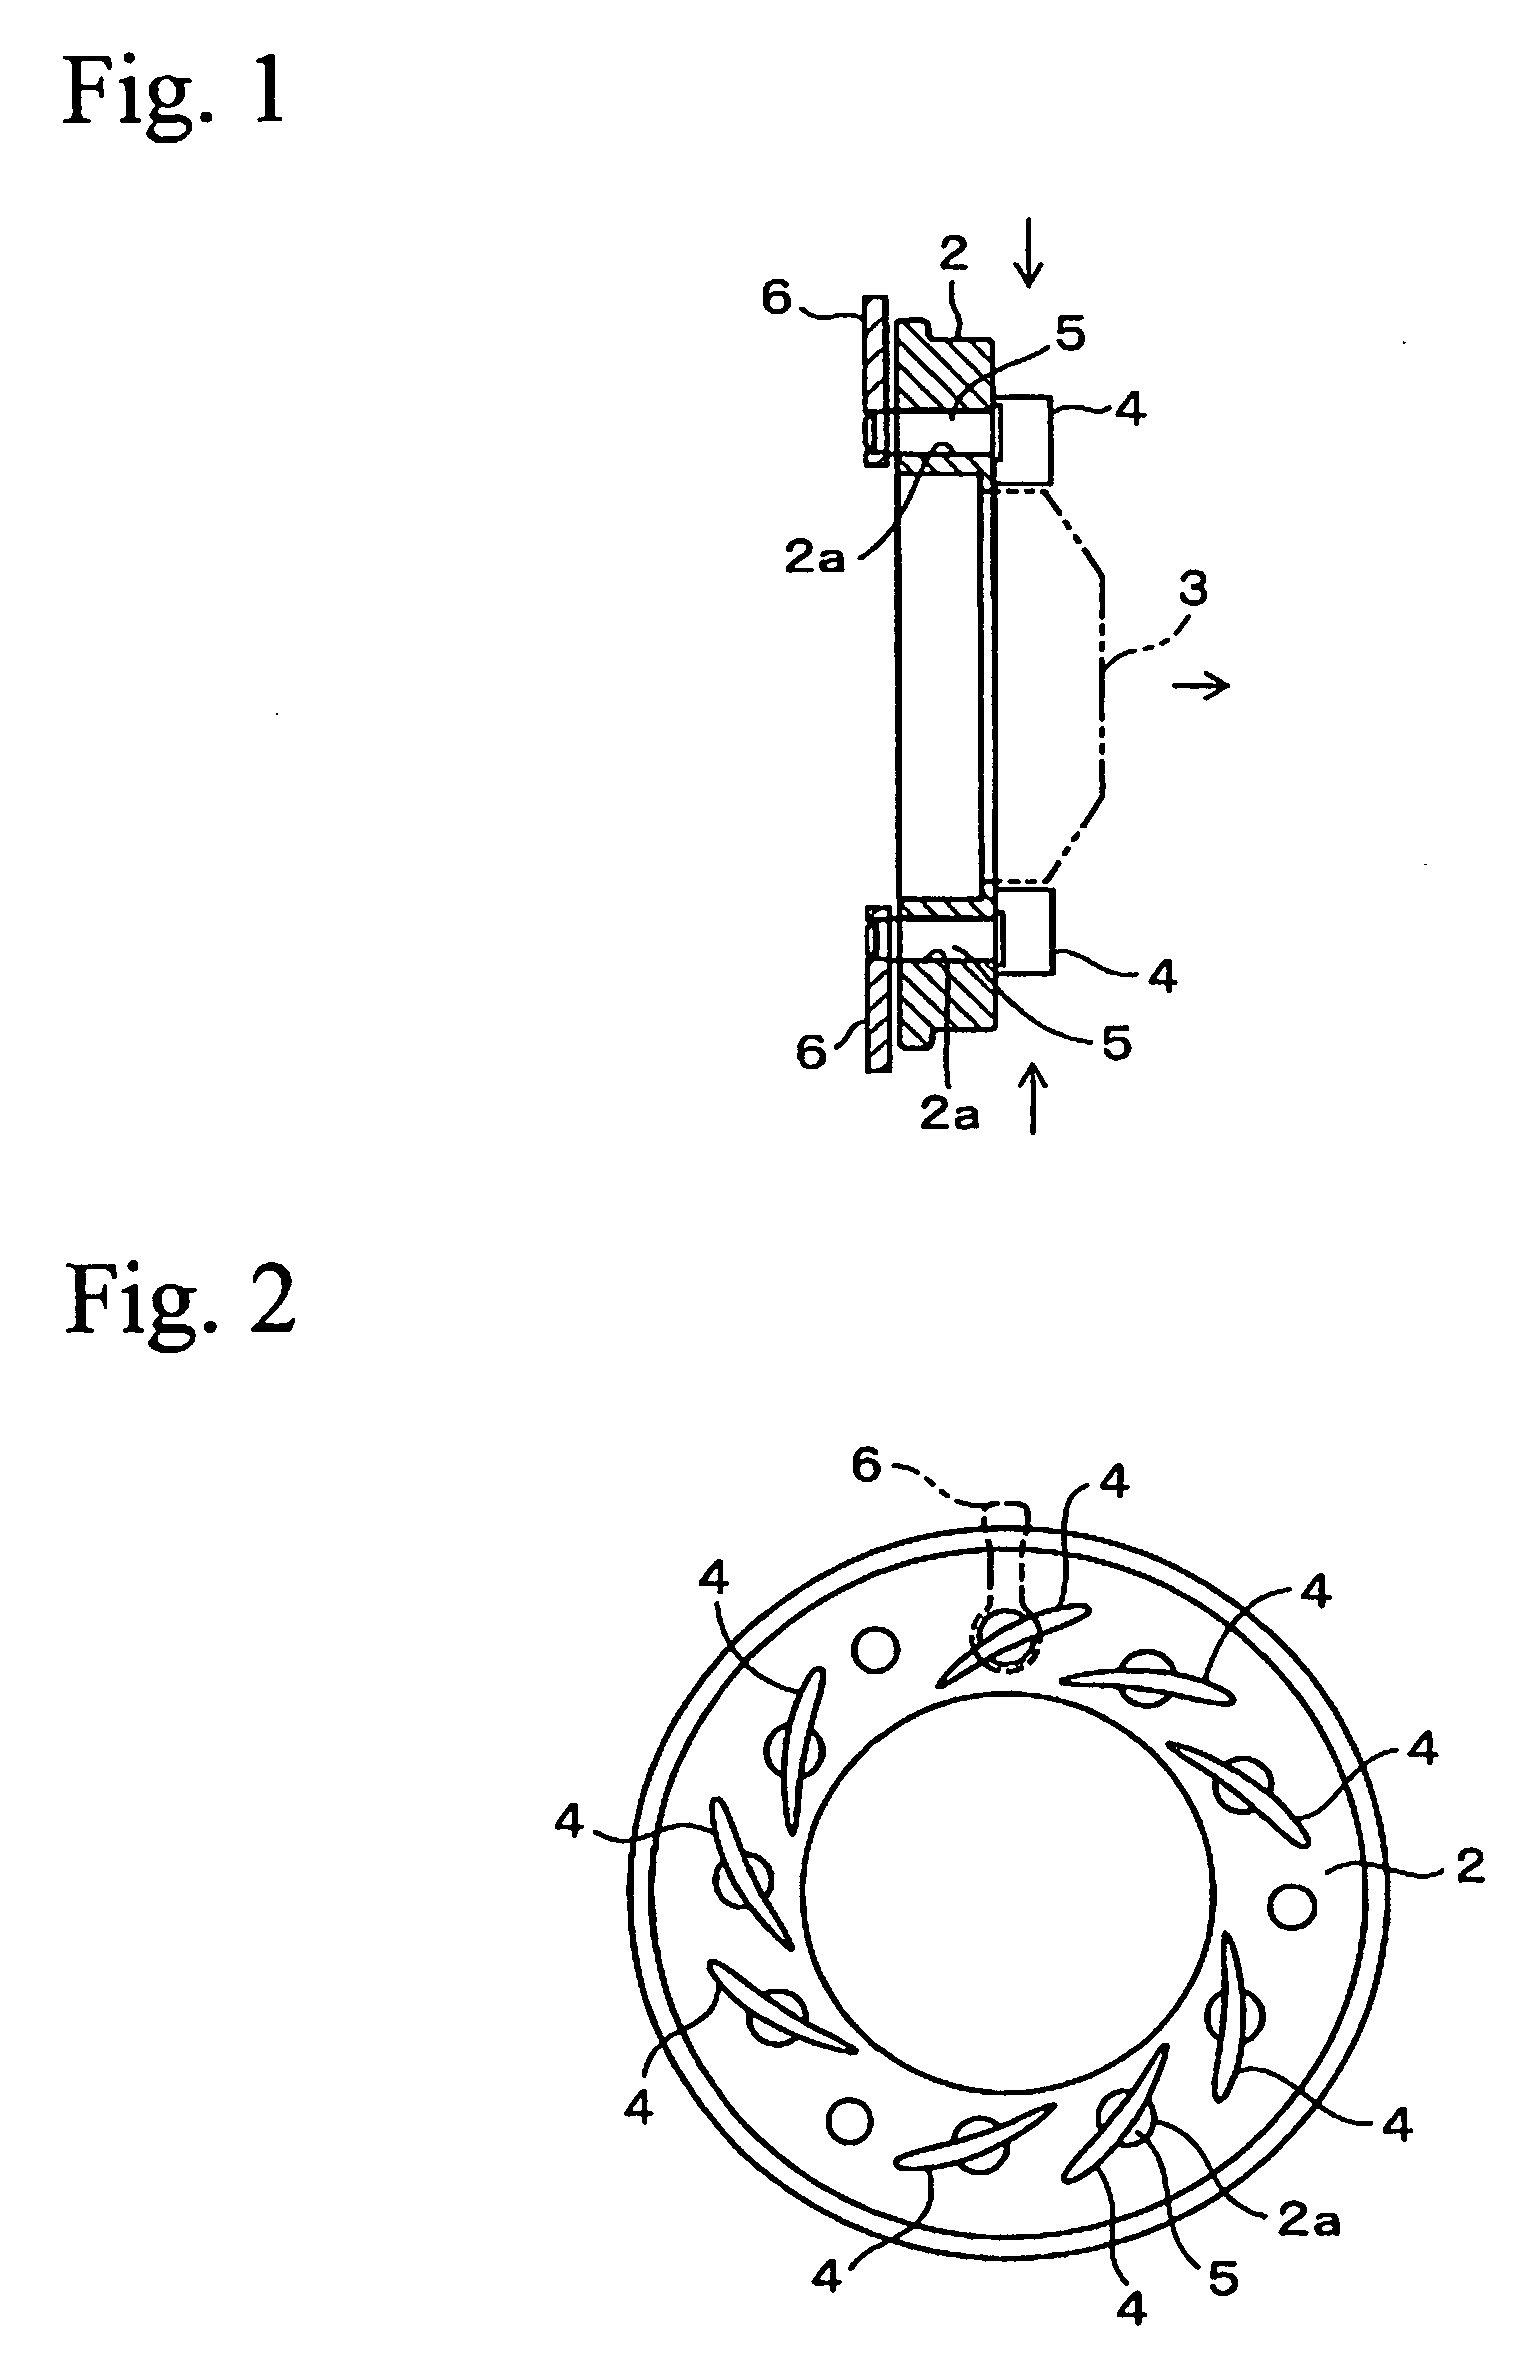 Production method for sintered machine components